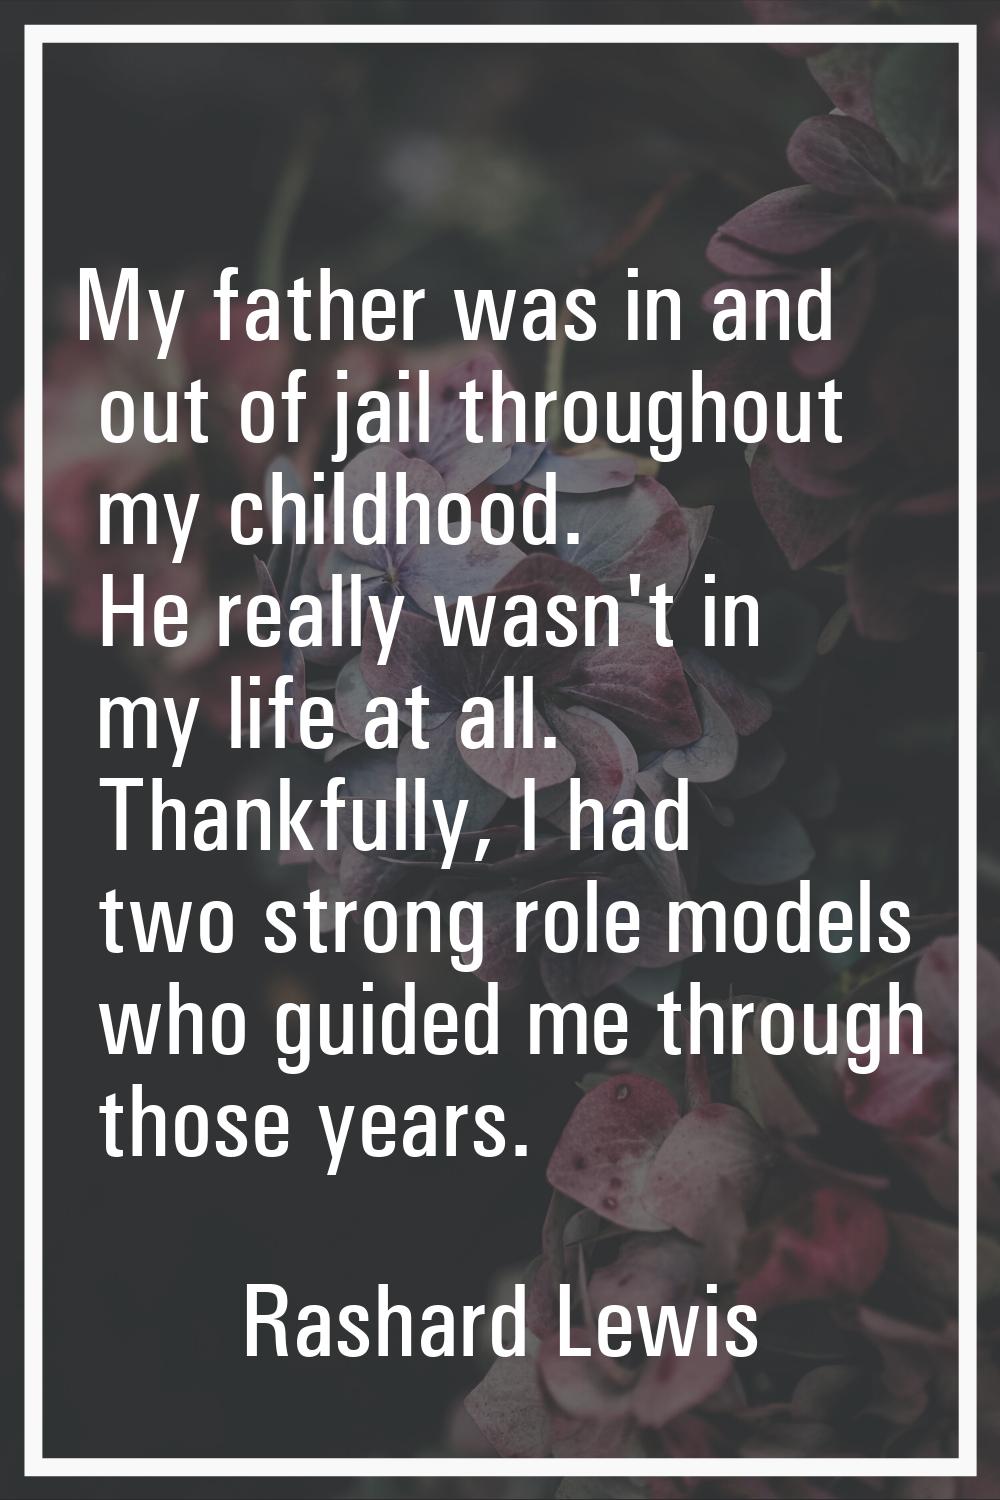 My father was in and out of jail throughout my childhood. He really wasn't in my life at all. Thank